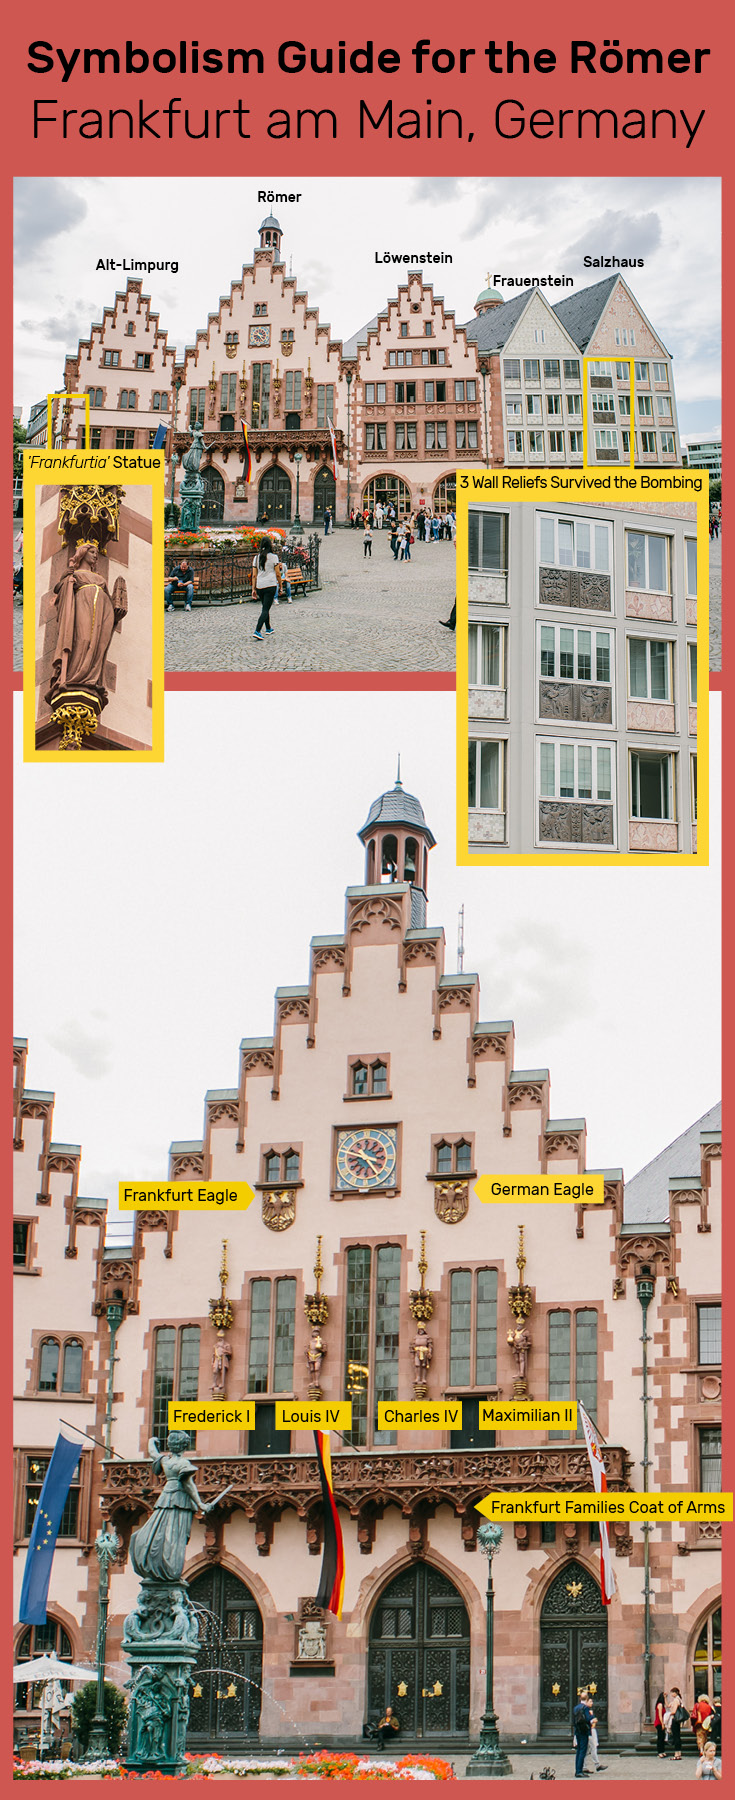 Symbolism Guide for the Roemer | Typical for Gothic Revival, on the Roemer facade in Frankfurt am Main, Germany, you’ll see pointed arches, decorative patterns, and embellished structural elements.